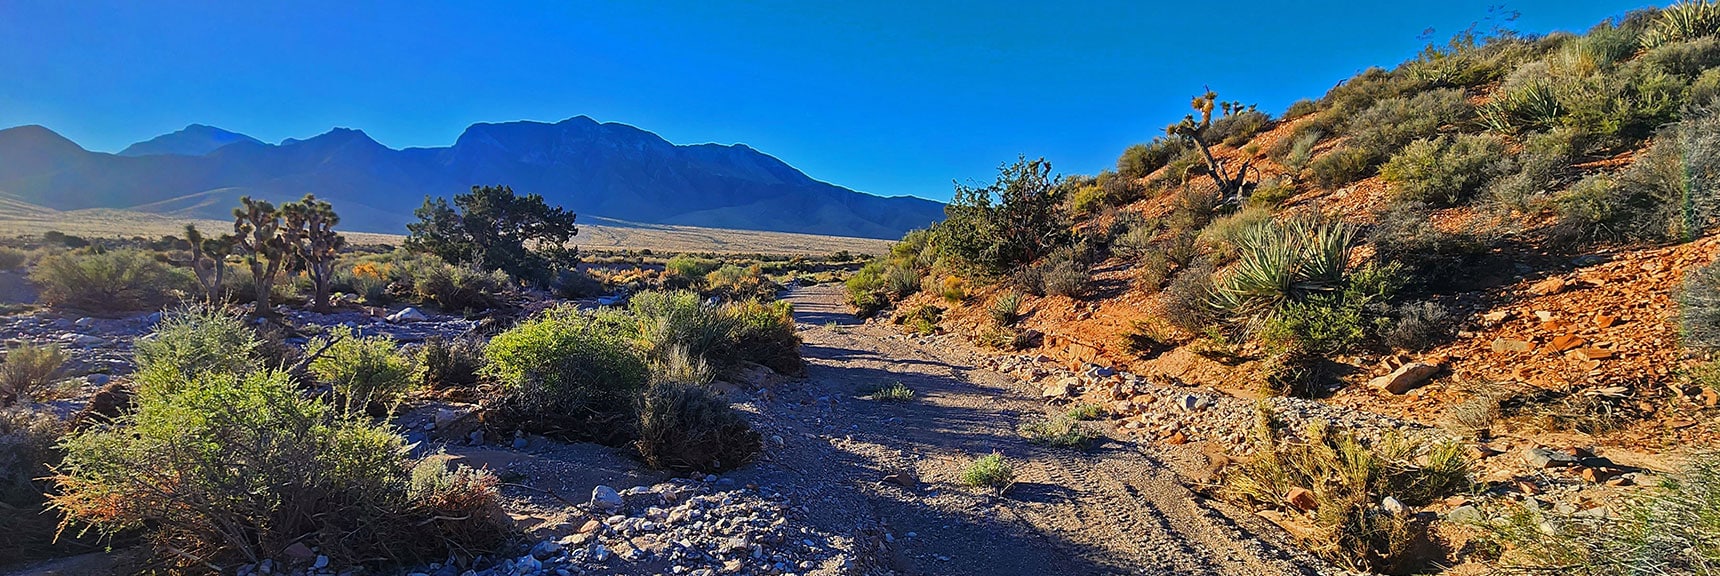 Begin by Entering a Wash Across Lovell Canyon Road | Landmark Bluff | Lovell Canyon, Nevada